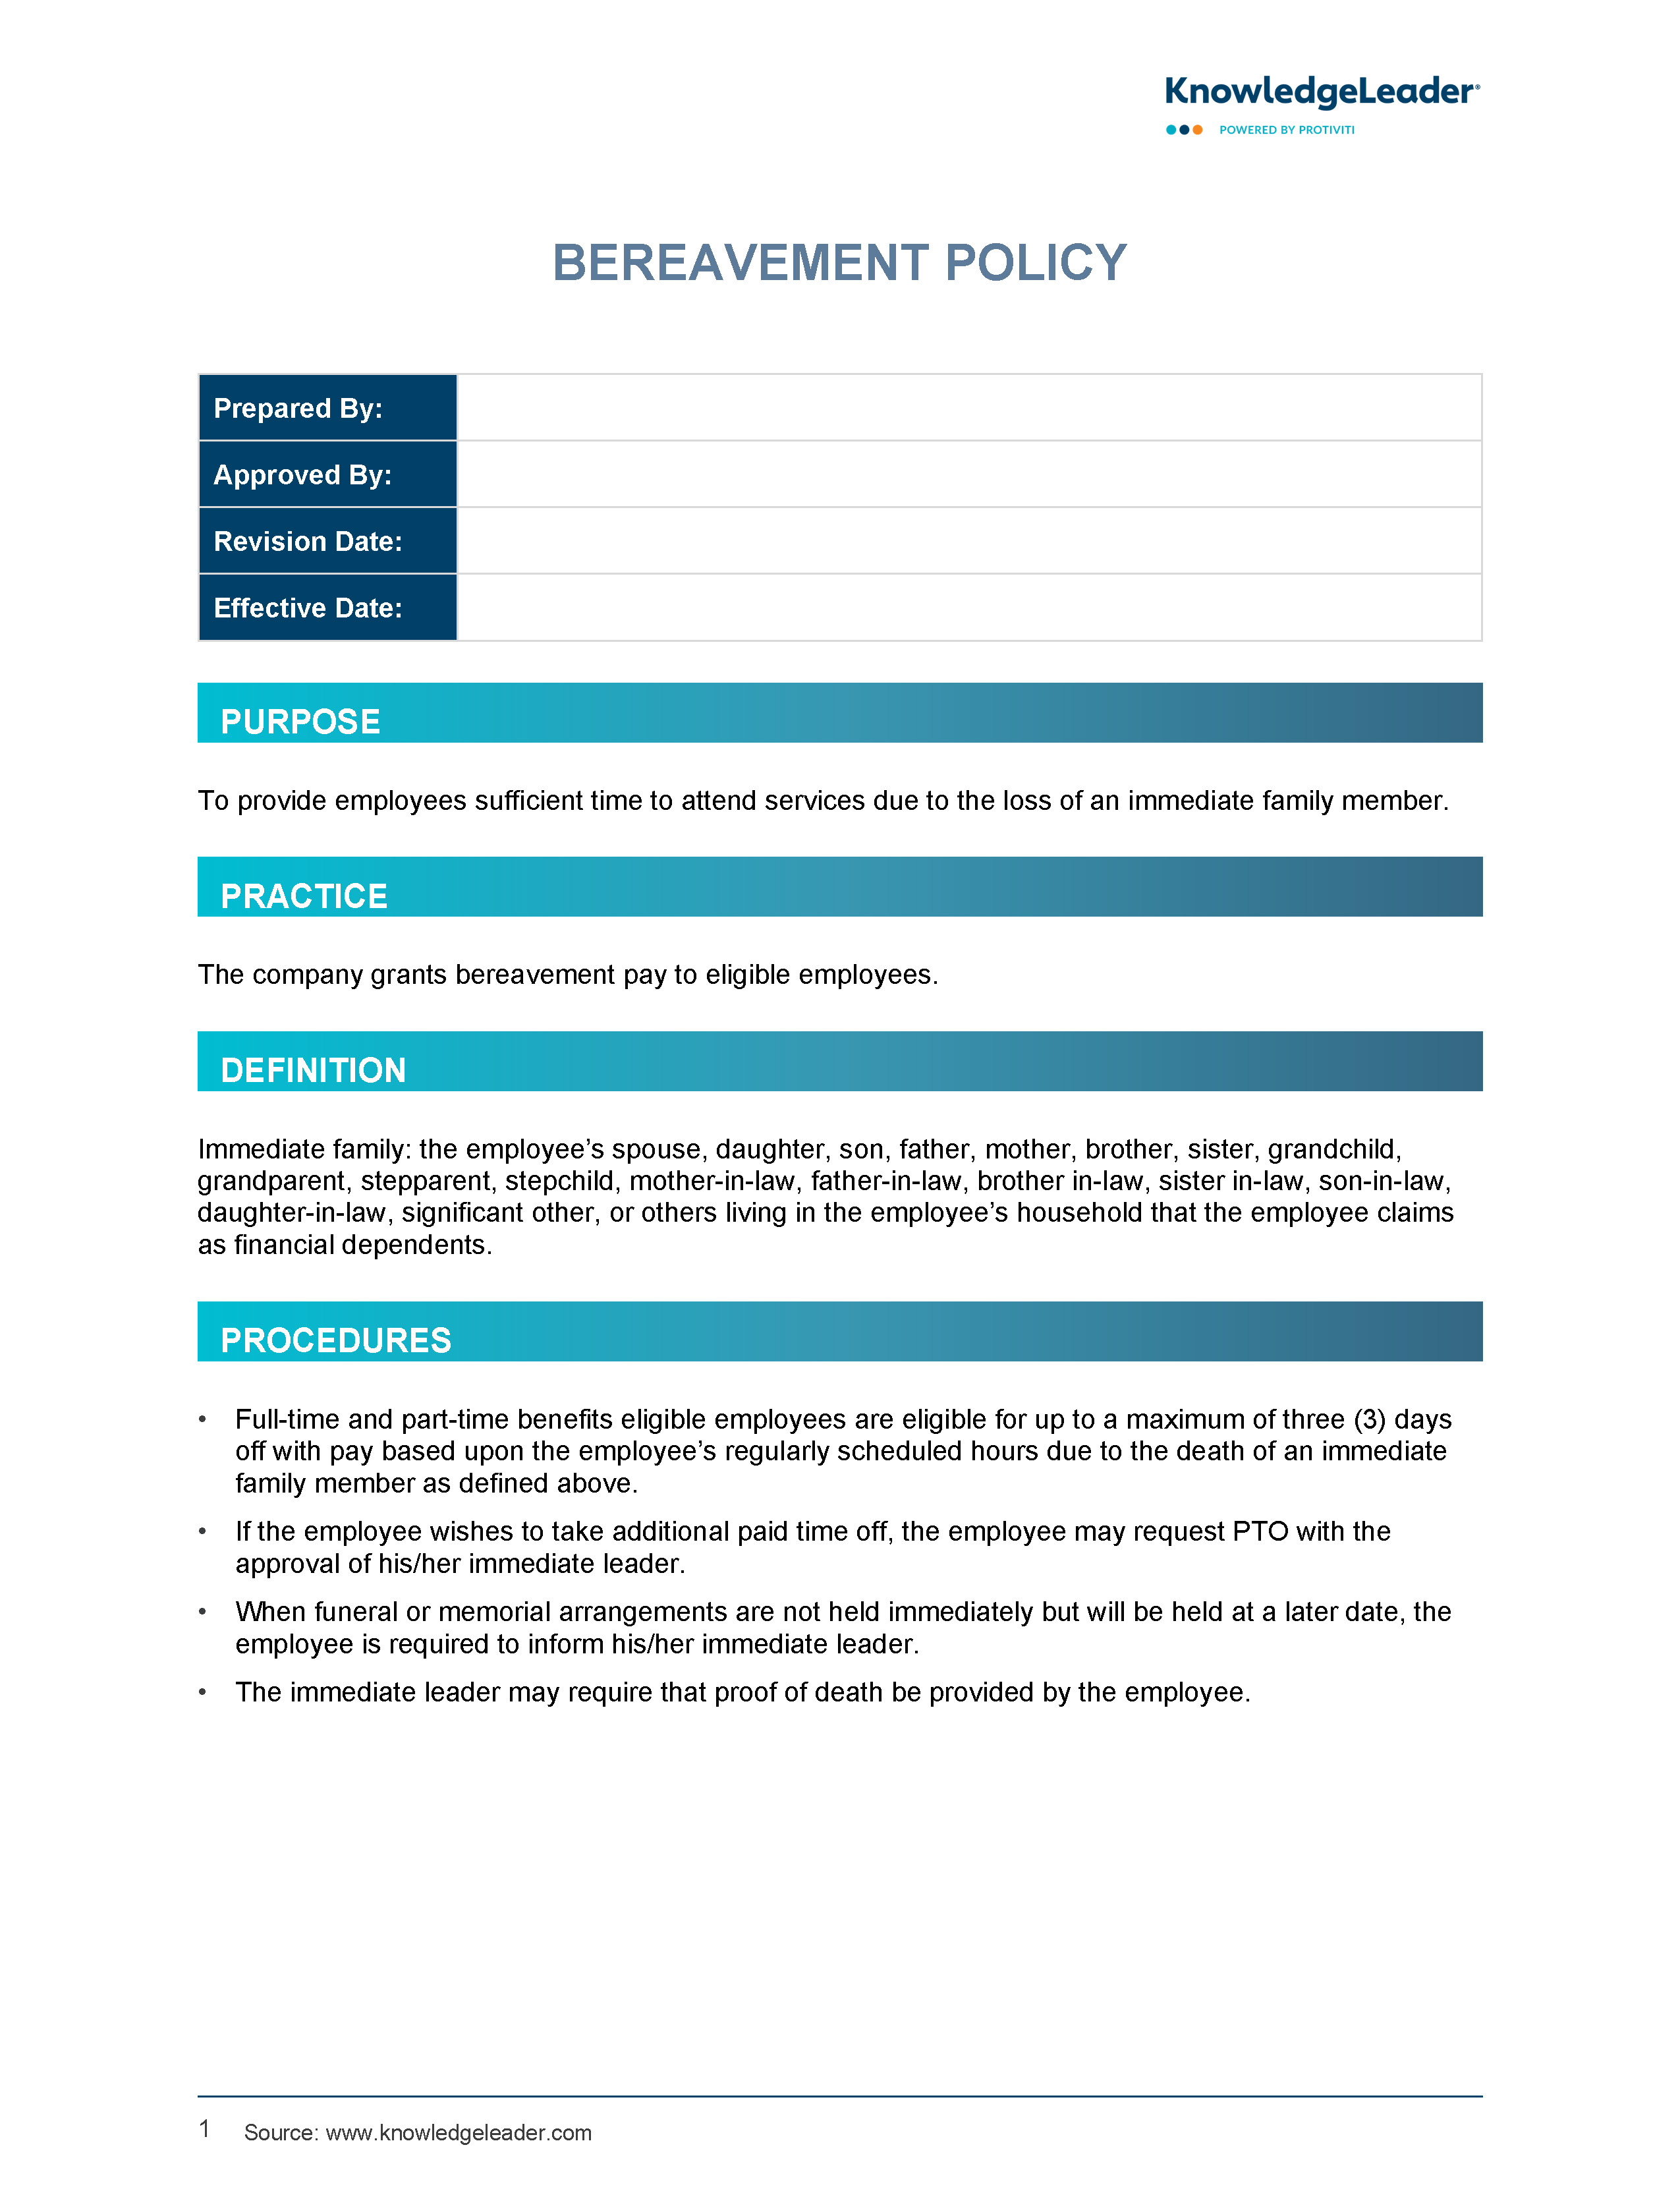 screenshot of the first page of Bereavement Policy